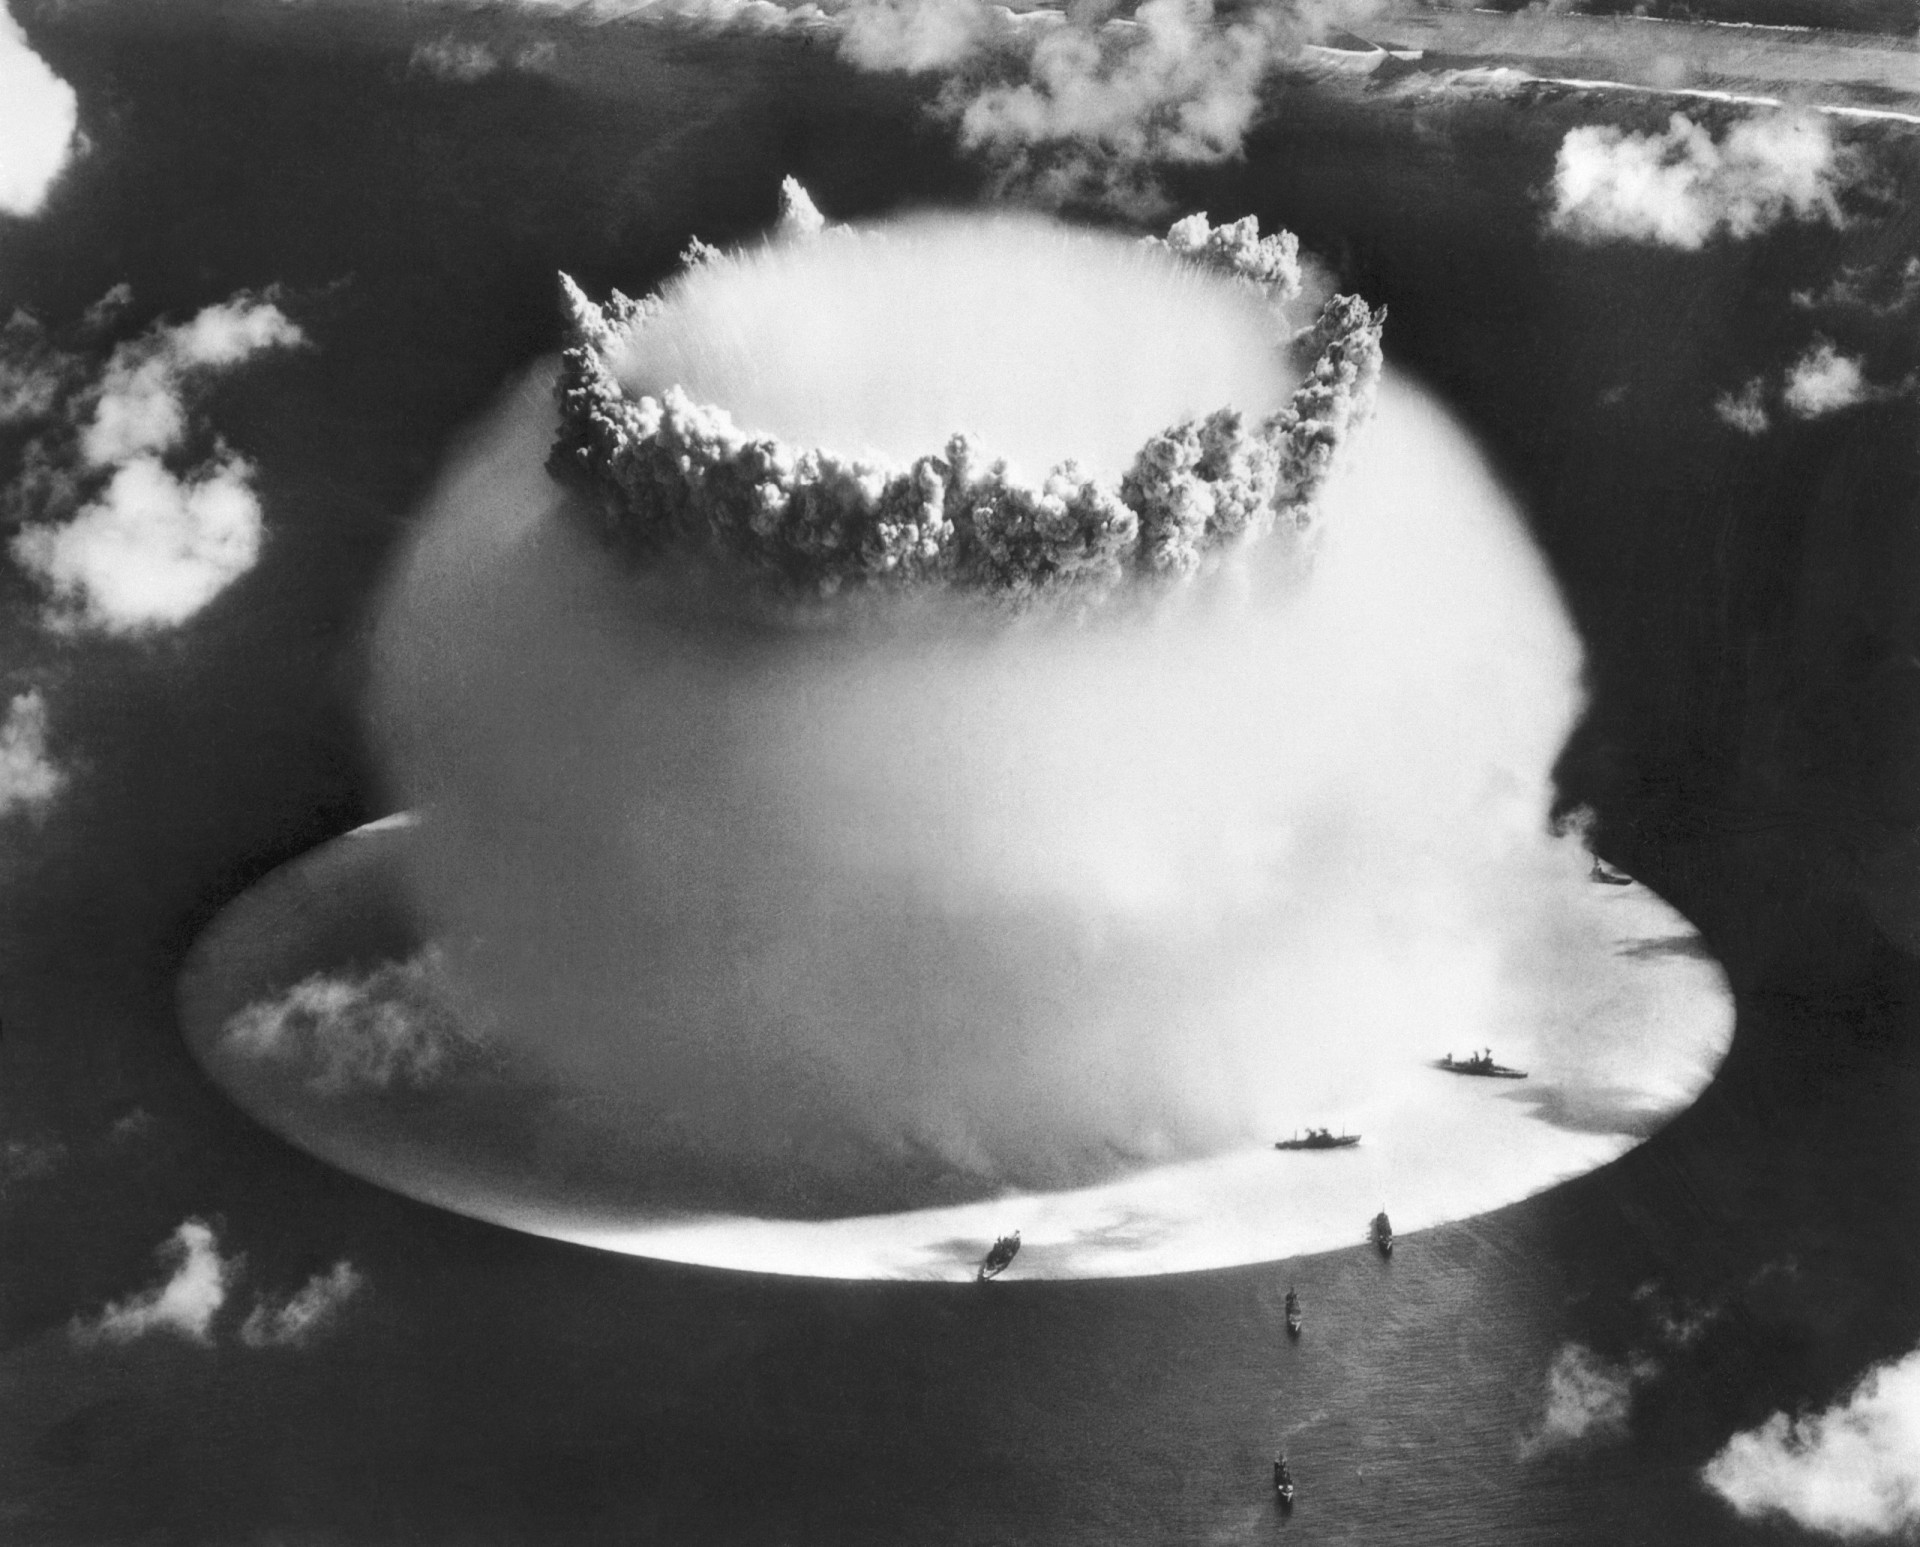 <p>Over the next 12 years, the US sent 23 nuclear bombs raining down on the Micronesian atoll.</p><p>You may also like:<a href="https://www.starsinsider.com/n/455155?utm_source=msn.com&utm_medium=display&utm_campaign=referral_description&utm_content=686881en-us"> Horoscopes 2021: Astrological predictions for the New Year</a></p>